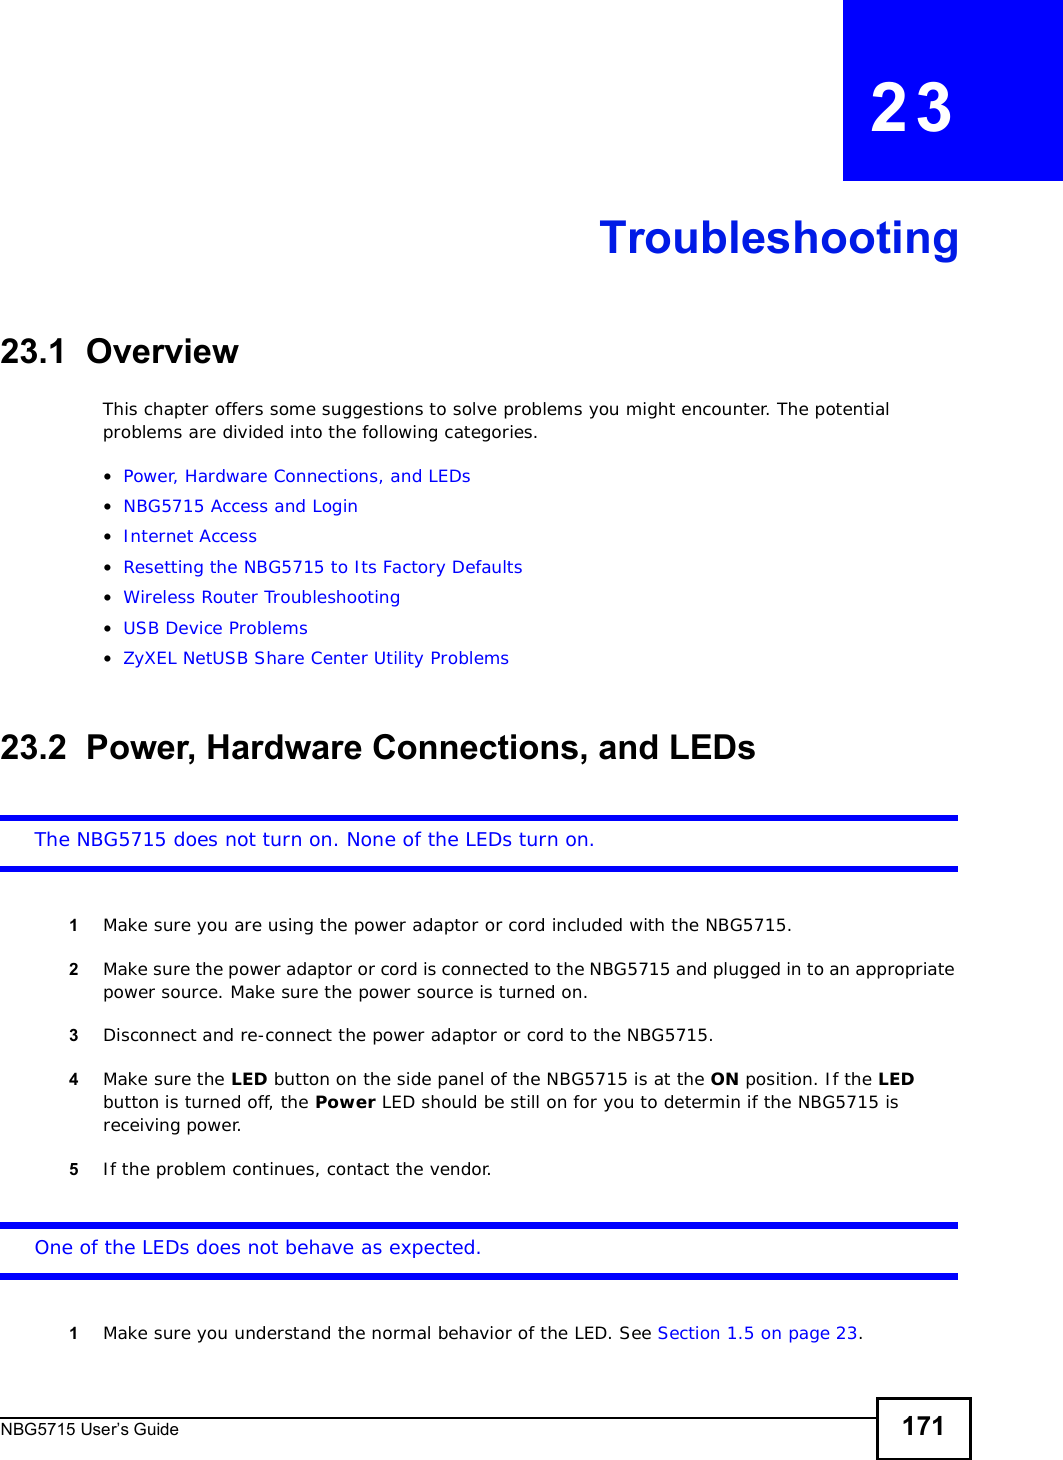 NBG5715 User’s Guide 171CHAPTER   23Troubleshooting23.1  OverviewThis chapter offers some suggestions to solve problems you might encounter. The potential problems are divided into the following categories. •Power, Hardware Connections, and LEDs•NBG5715 Access and Login•Internet Access•Resetting the NBG5715 to Its Factory Defaults•Wireless Router Troubleshooting•USB Device Problems•ZyXEL NetUSB Share Center Utility Problems23.2  Power, Hardware Connections, and LEDsThe NBG5715 does not turn on. None of the LEDs turn on.1Make sure you are using the power adaptor or cord included with the NBG5715.2Make sure the power adaptor or cord is connected to the NBG5715 and plugged in to an appropriate power source. Make sure the power source is turned on.3Disconnect and re-connect the power adaptor or cord to the NBG5715.4Make sure the LED button on the side panel of the NBG5715 is at the ON position. If the LED button is turned off, the Power LED should be still on for you to determin if the NBG5715 is receiving power. 5If the problem continues, contact the vendor.One of the LEDs does not behave as expected.1Make sure you understand the normal behavior of the LED. See Section 1.5 on page 23.